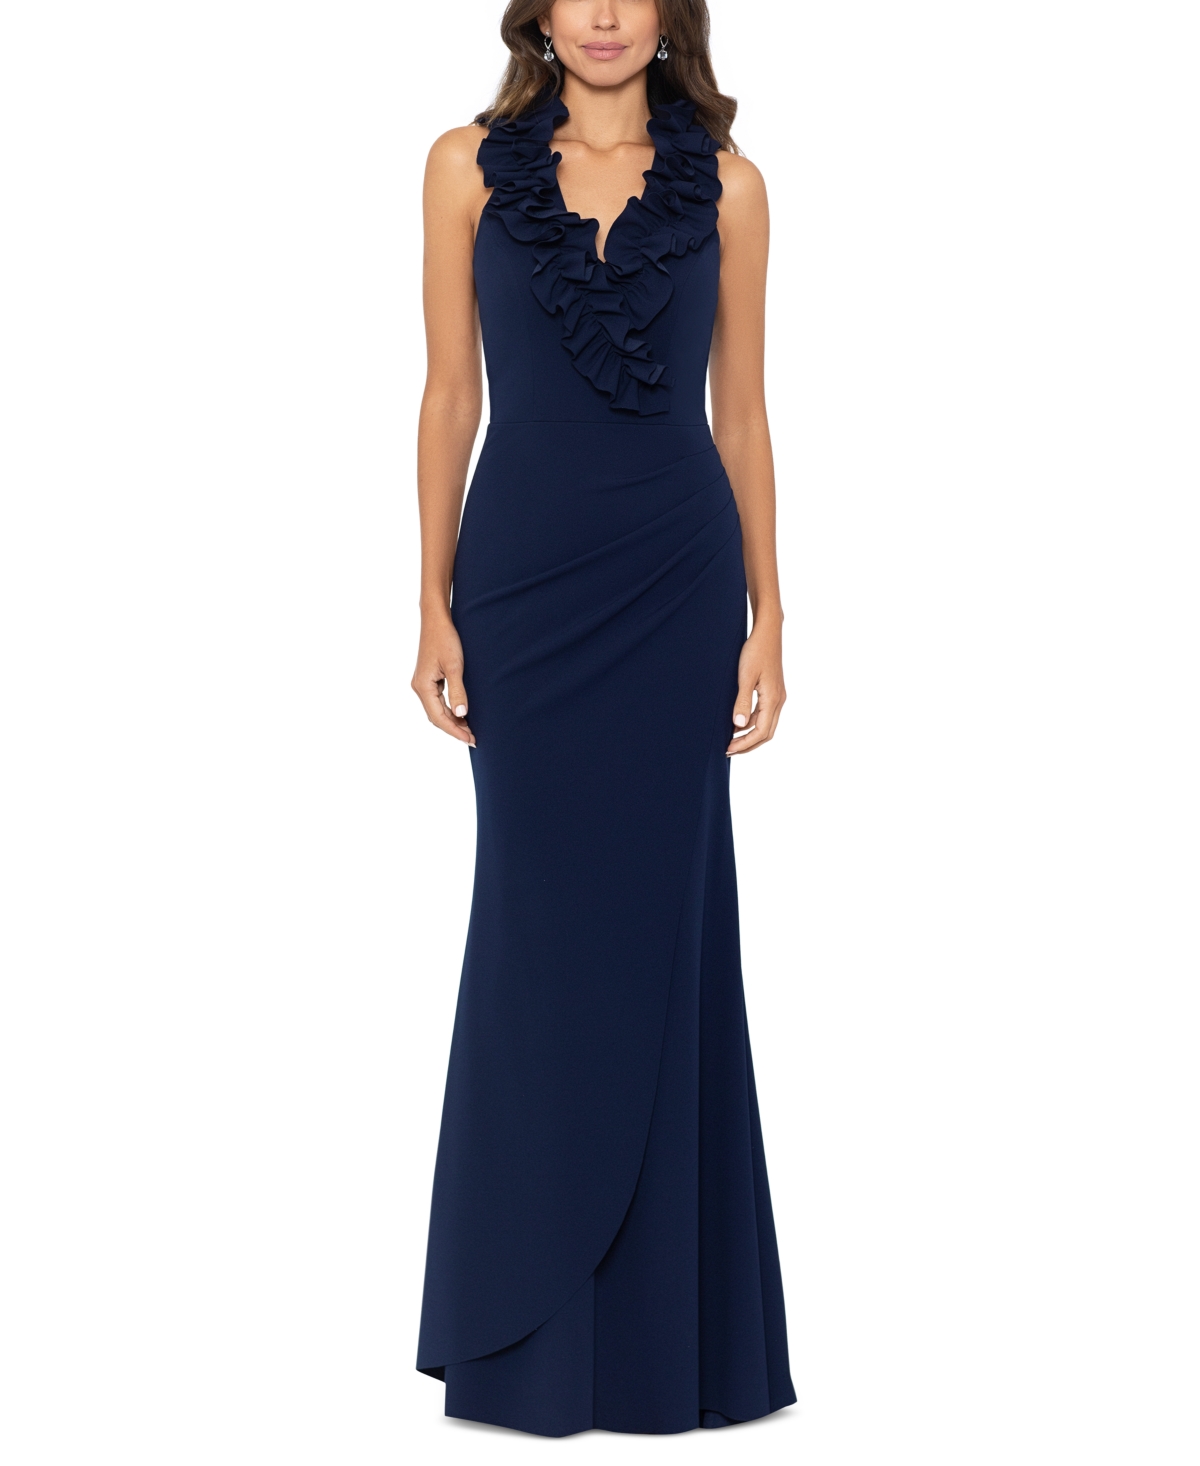 Women's Ruffled-v-Neck Sleeveless Ruched Gown - Navy